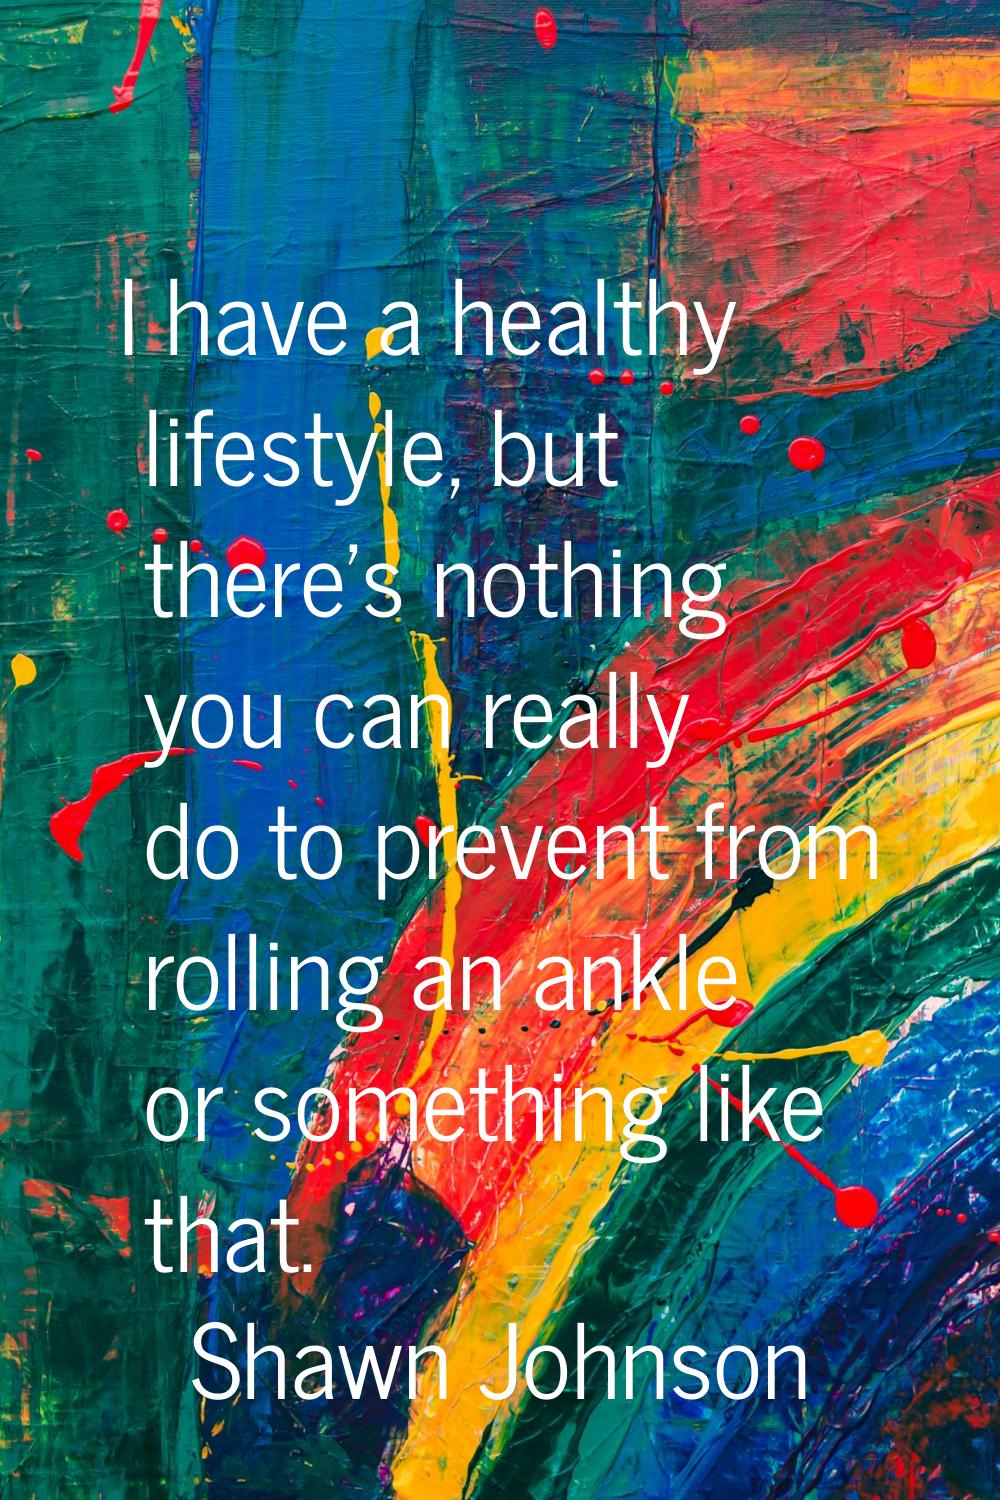 I have a healthy lifestyle, but there's nothing you can really do to prevent from rolling an ankle 